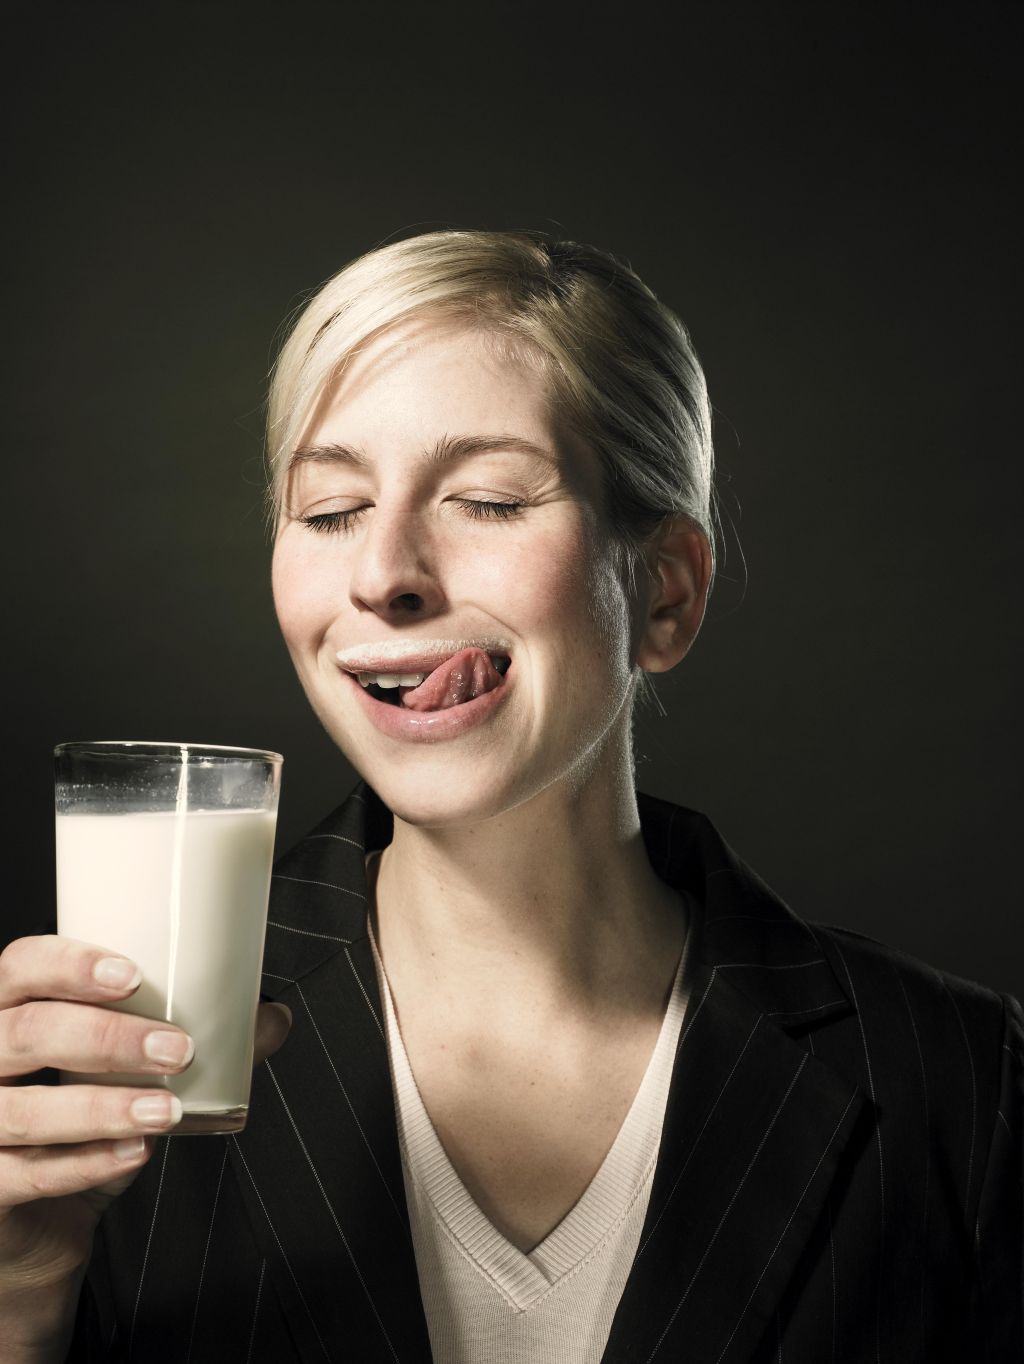 Young woman holding glass of milk, close-up